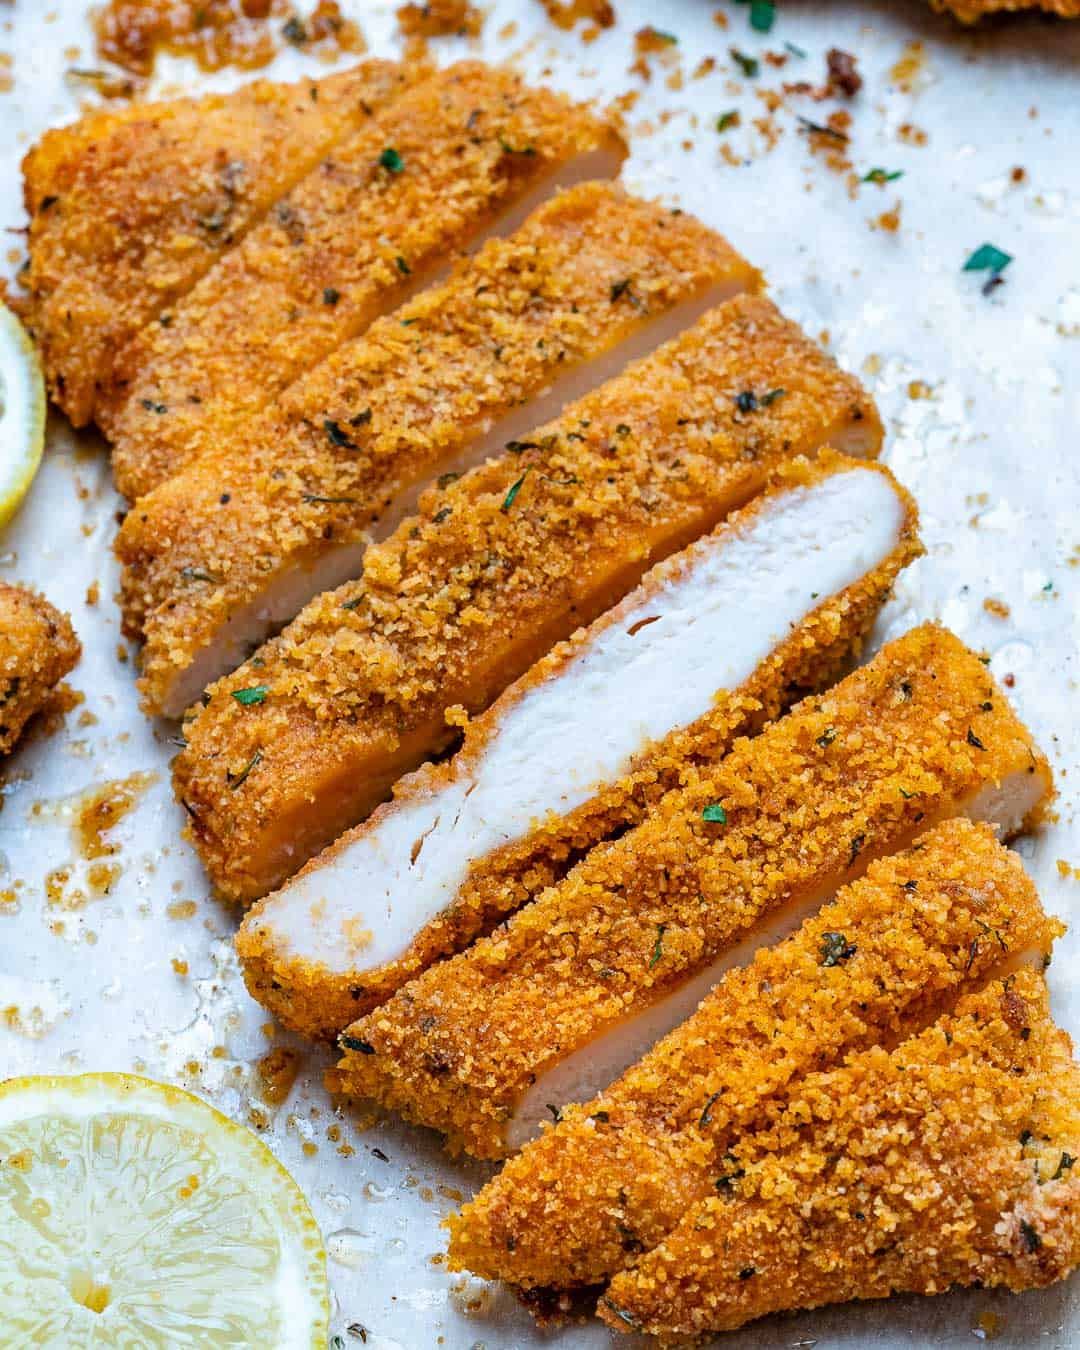 How Long Do You Bake Thin Chicken Breast?